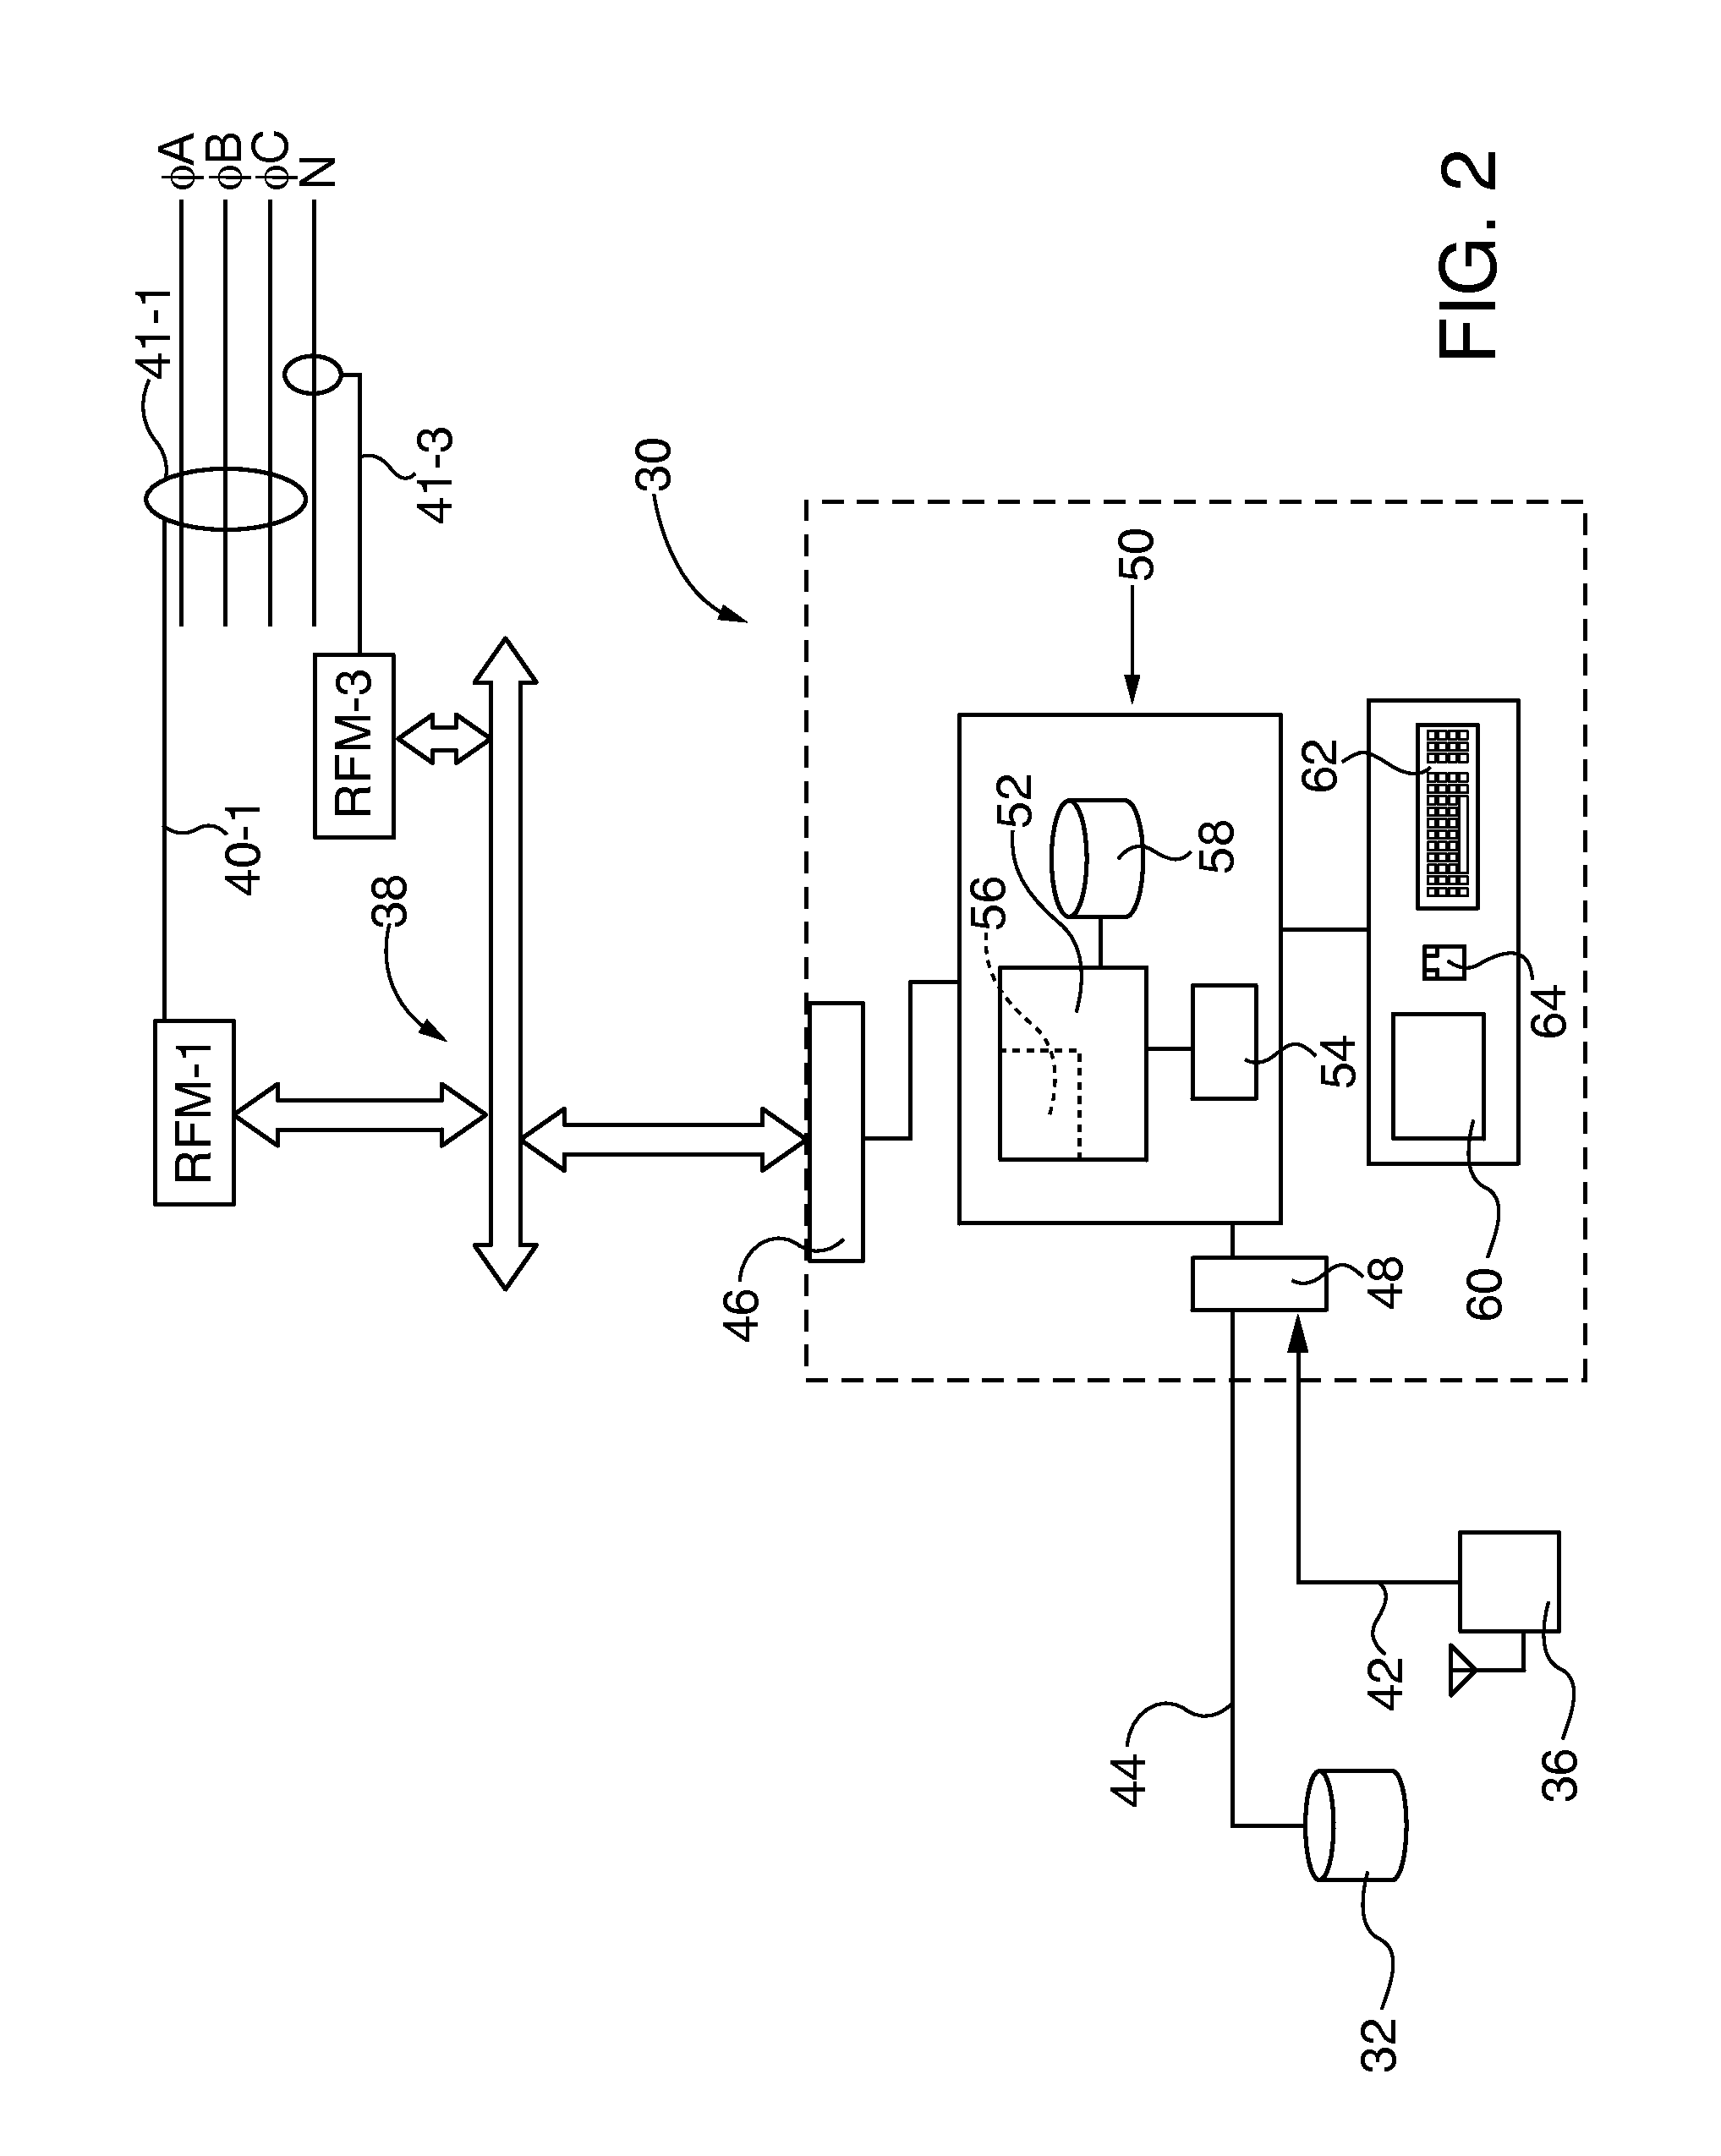 Self learning radio frequency monitoring system for identifying and locating faults in electrical distribution systems